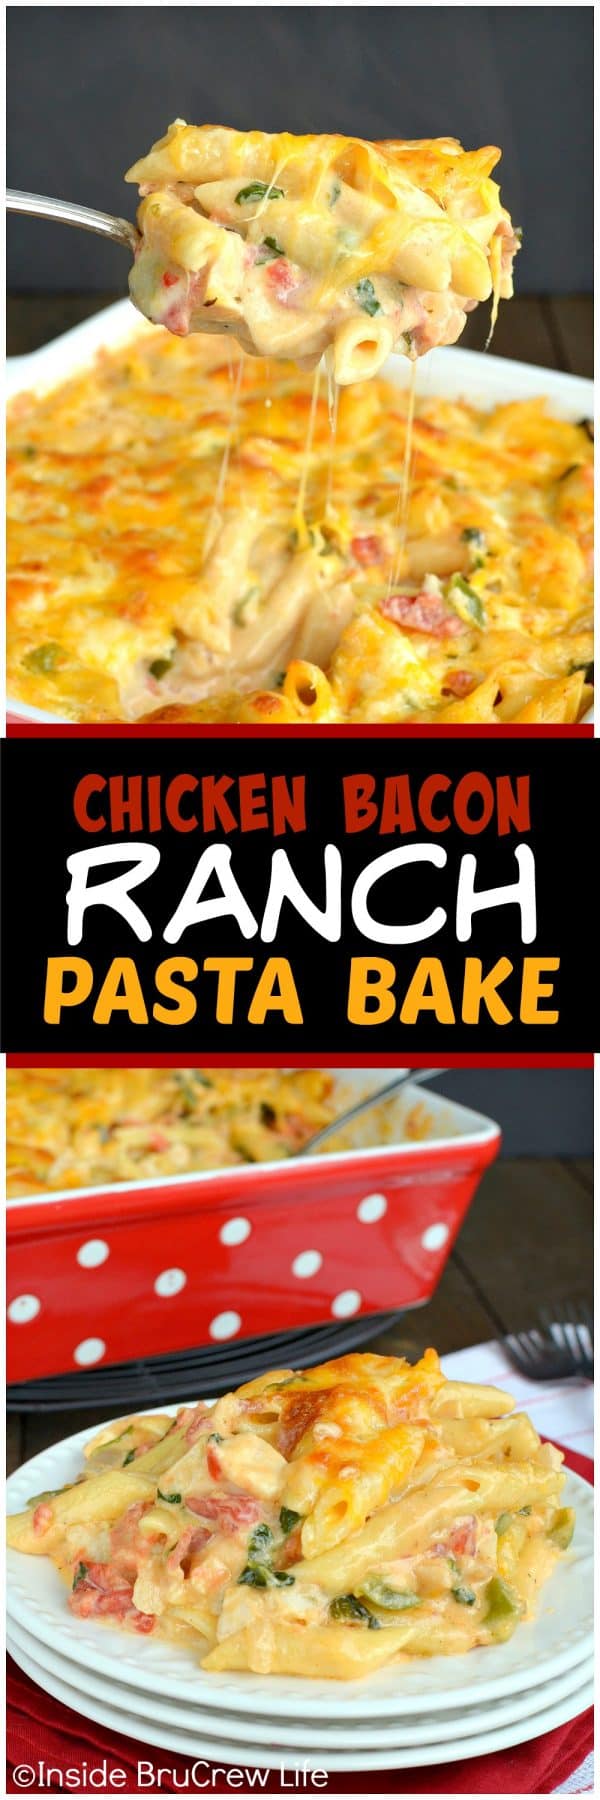 Chicken Bacon Ranch Pasta Bake - this pasta dish is loaded with meat, cheese, and veggies and always gets rave reviews. Easy comfort food recipe to make for busy nights. #pasta #chicken #bacon #comfortfood #dinner #cheesypasta